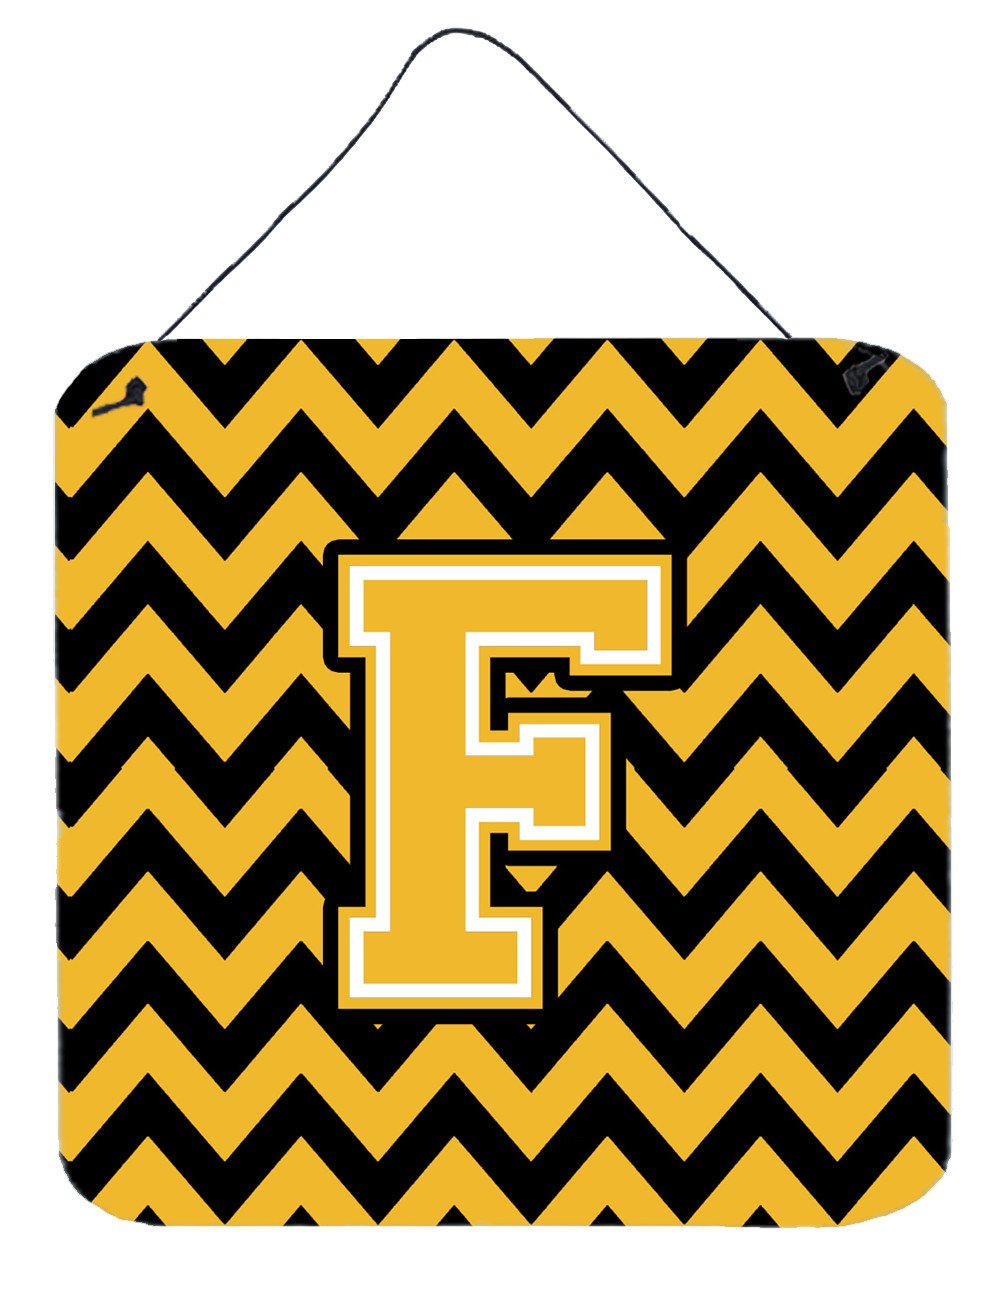 Letter F Chevron Black and Gold Wall or Door Hanging Prints CJ1053-FDS66 by Caroline's Treasures